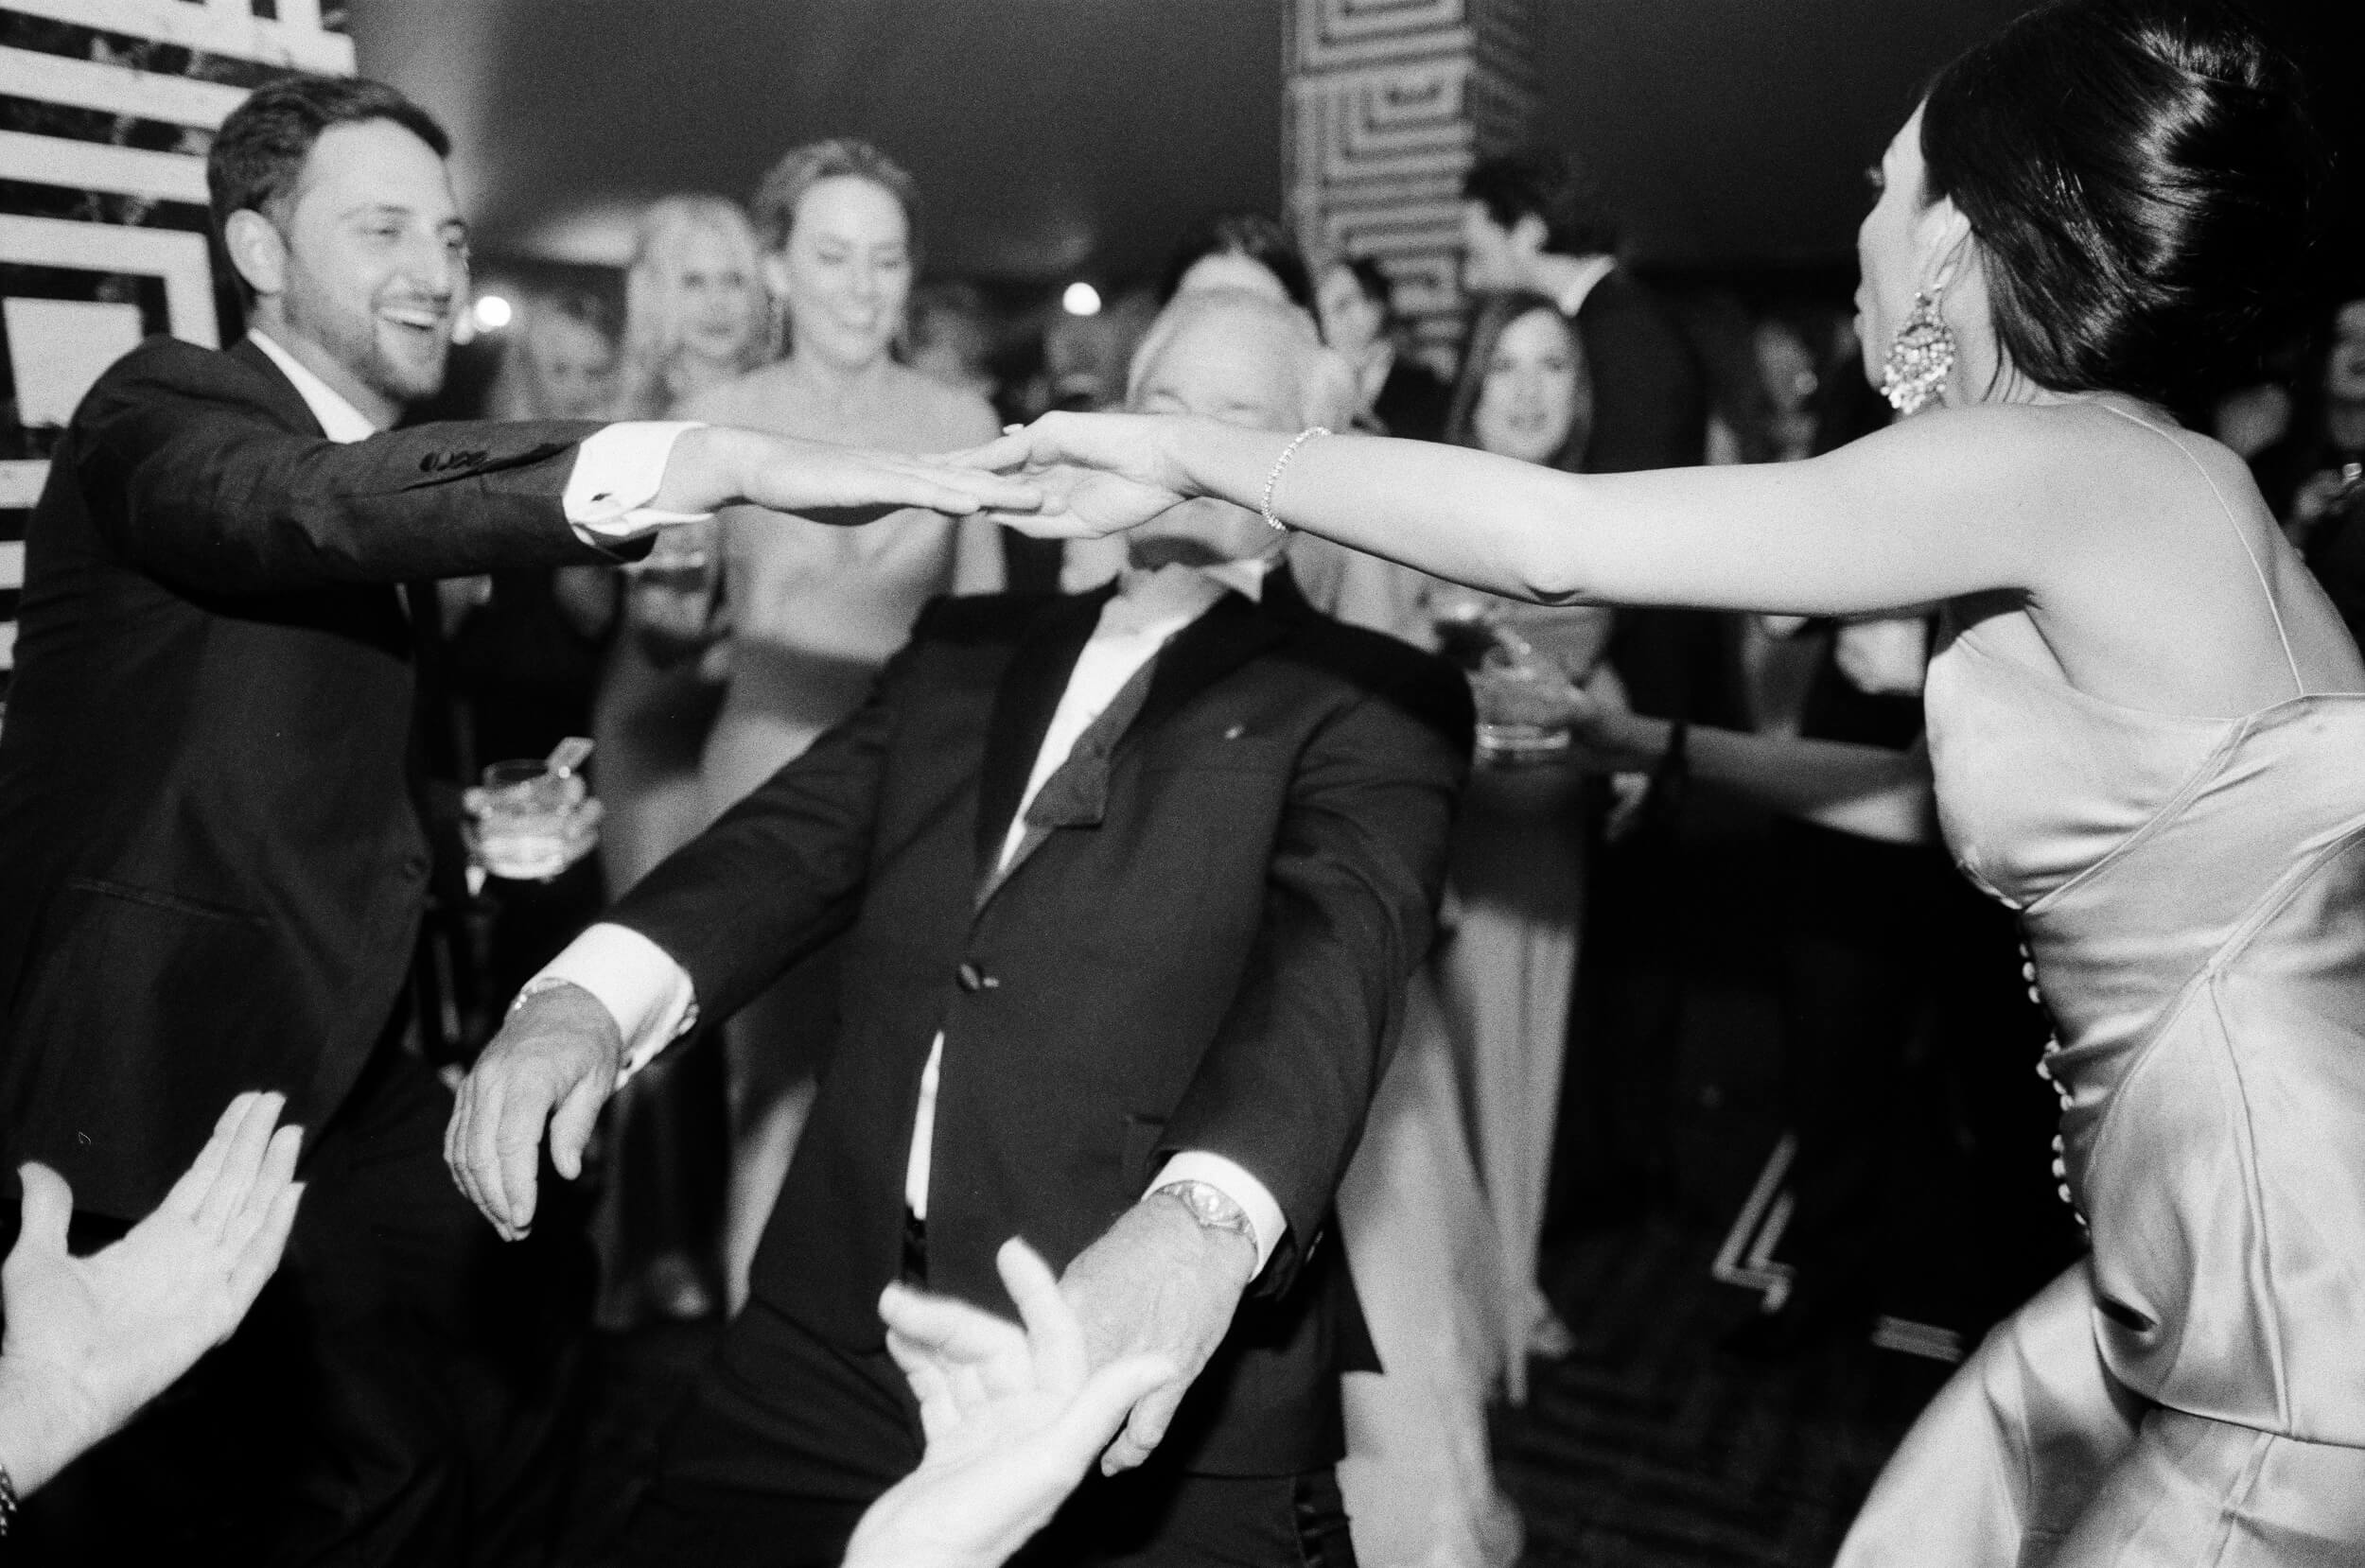 guests do the limbo at dance party reception